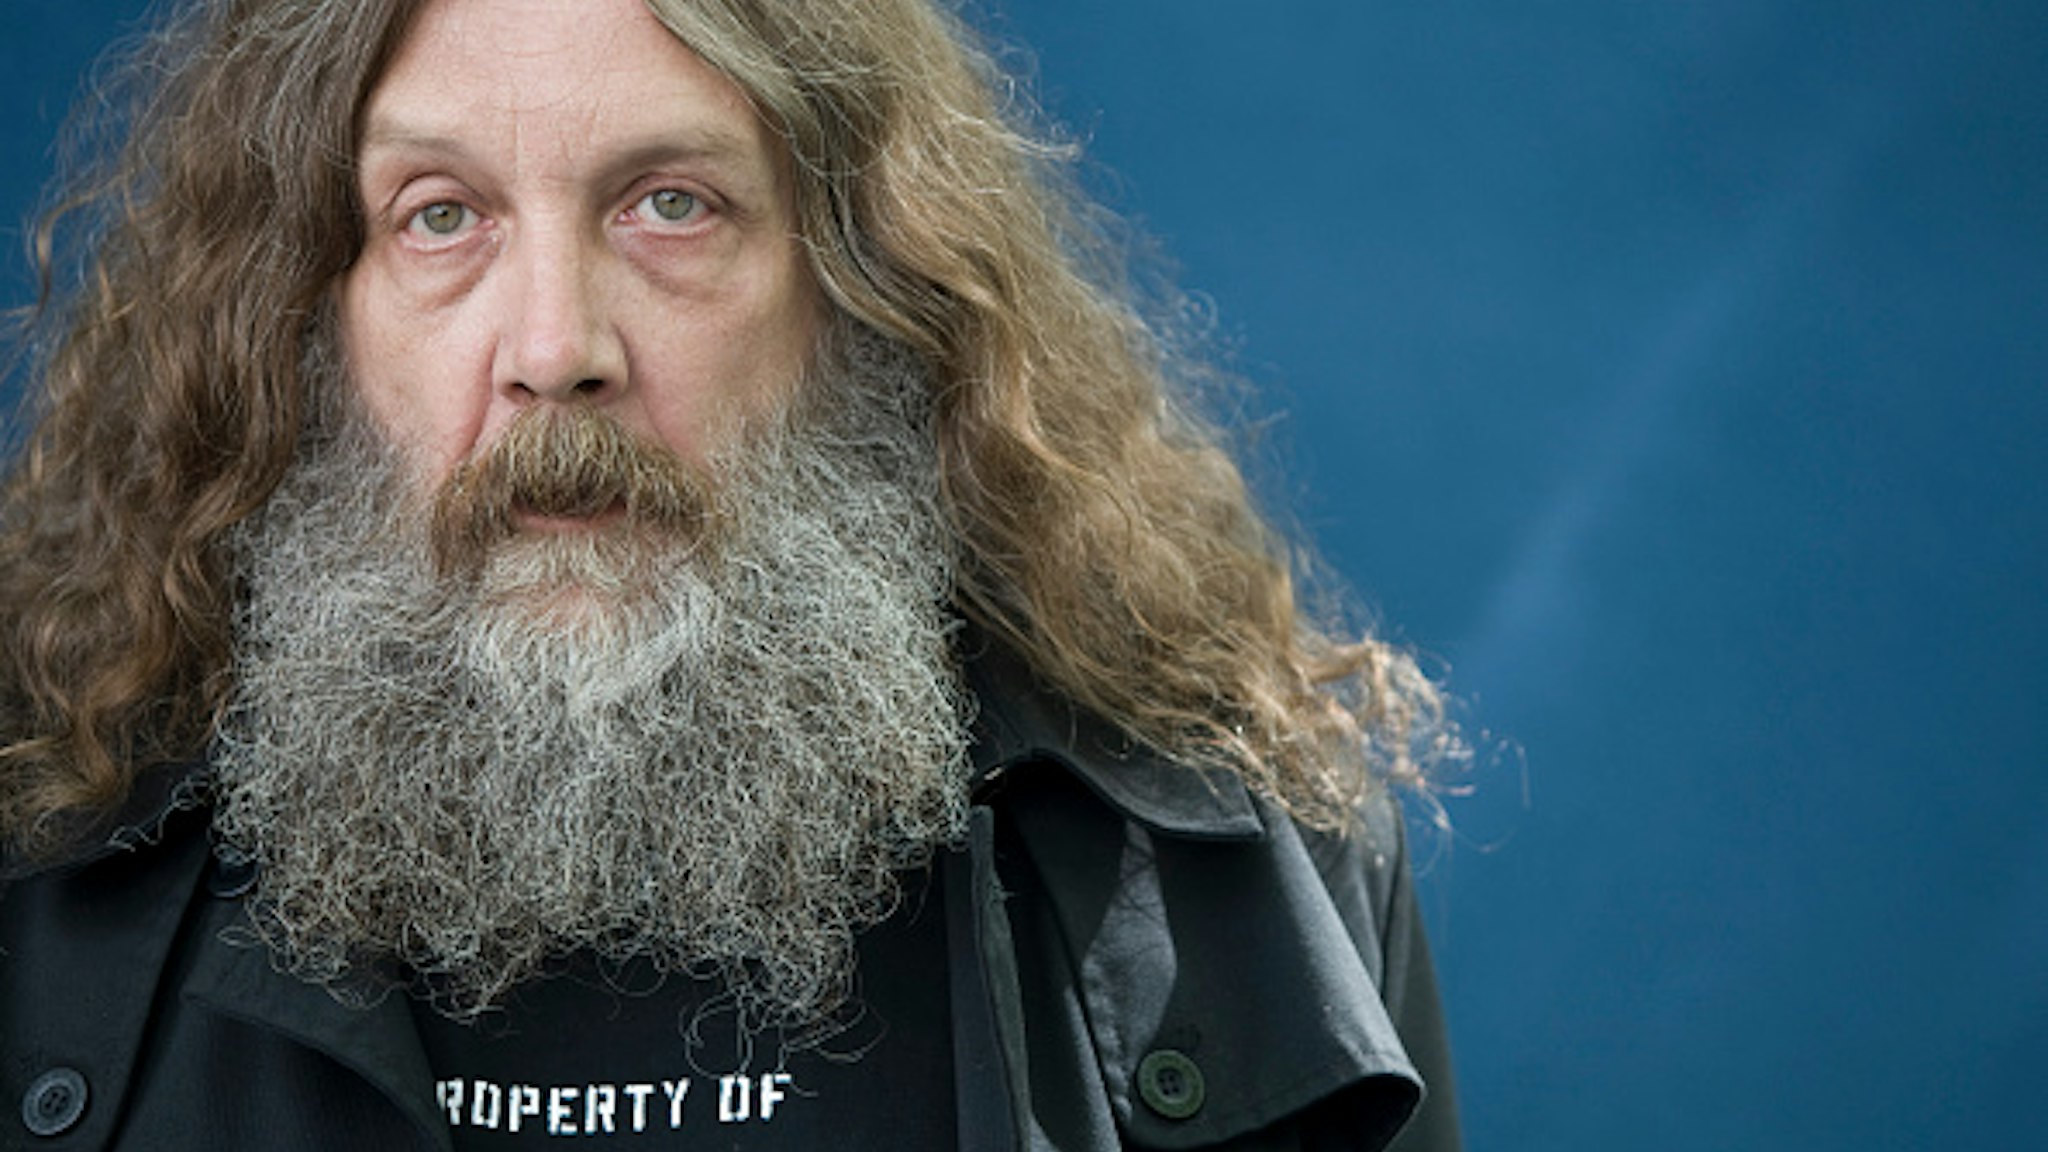 Acclaimed English comic book writer Alan Moore, pictured at the Edinburgh International Book Festival where he talked about his latest work. The three-week event is the world's biggest literary festival and is held during the annual Edinburgh Festival. The 2010 event featured talks and presentations by more than 500 authors from around the world.